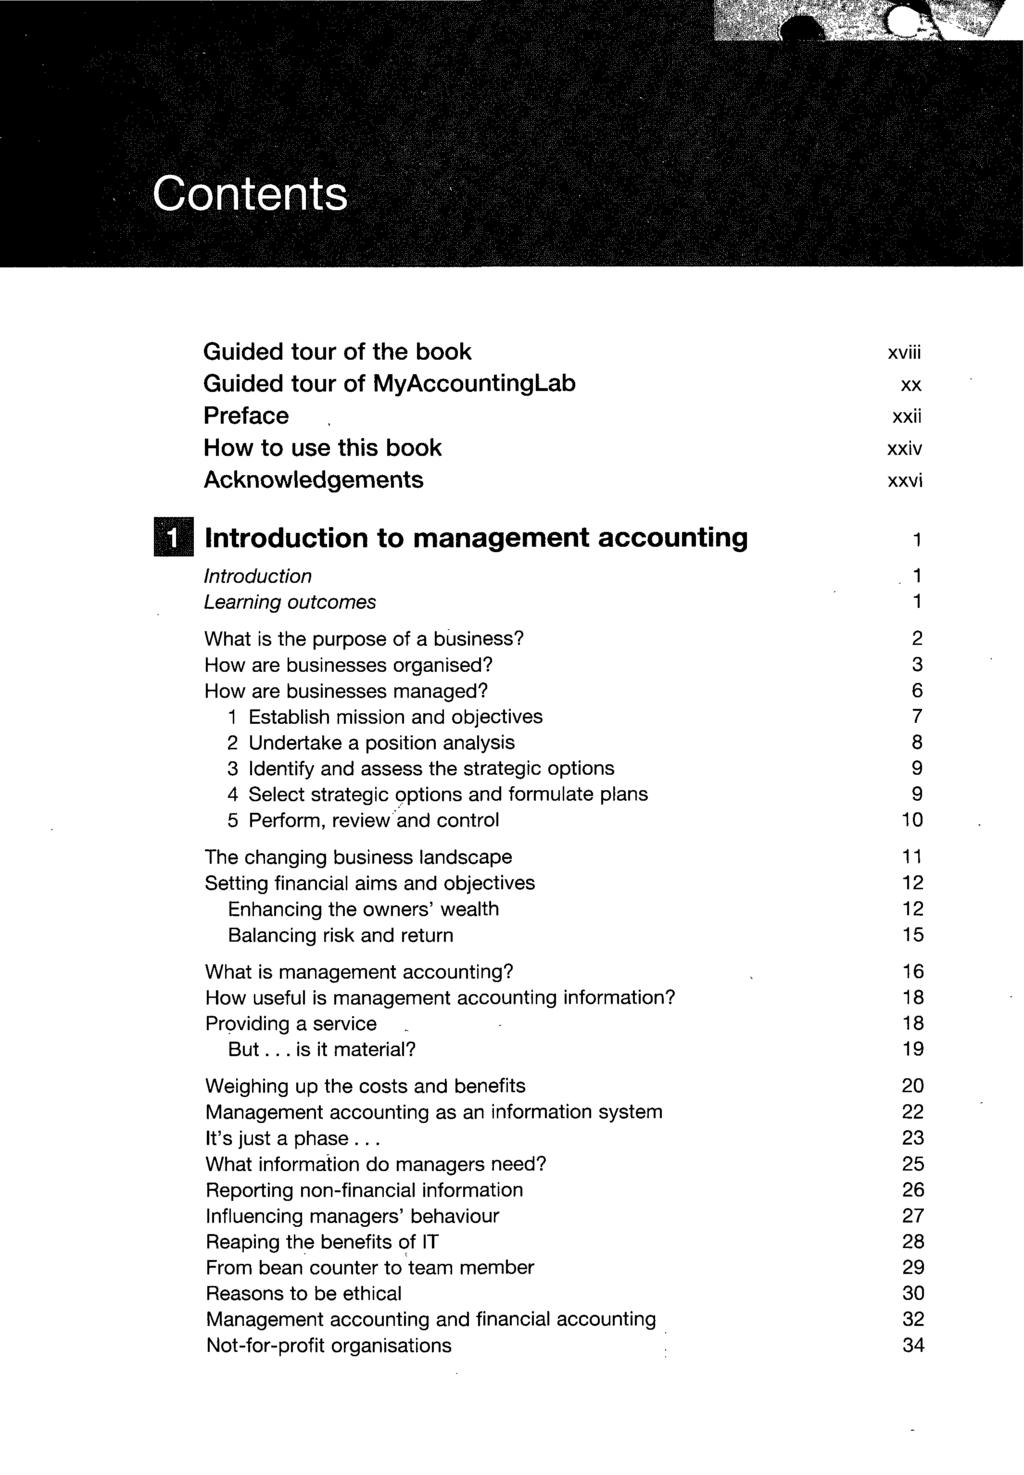 Contents Guided tour of the book Guided tour of MyAccountingLab Preface How to use this book Acknowledgements Introduction to management accounting Introduction Learning outcomes What is the purpose